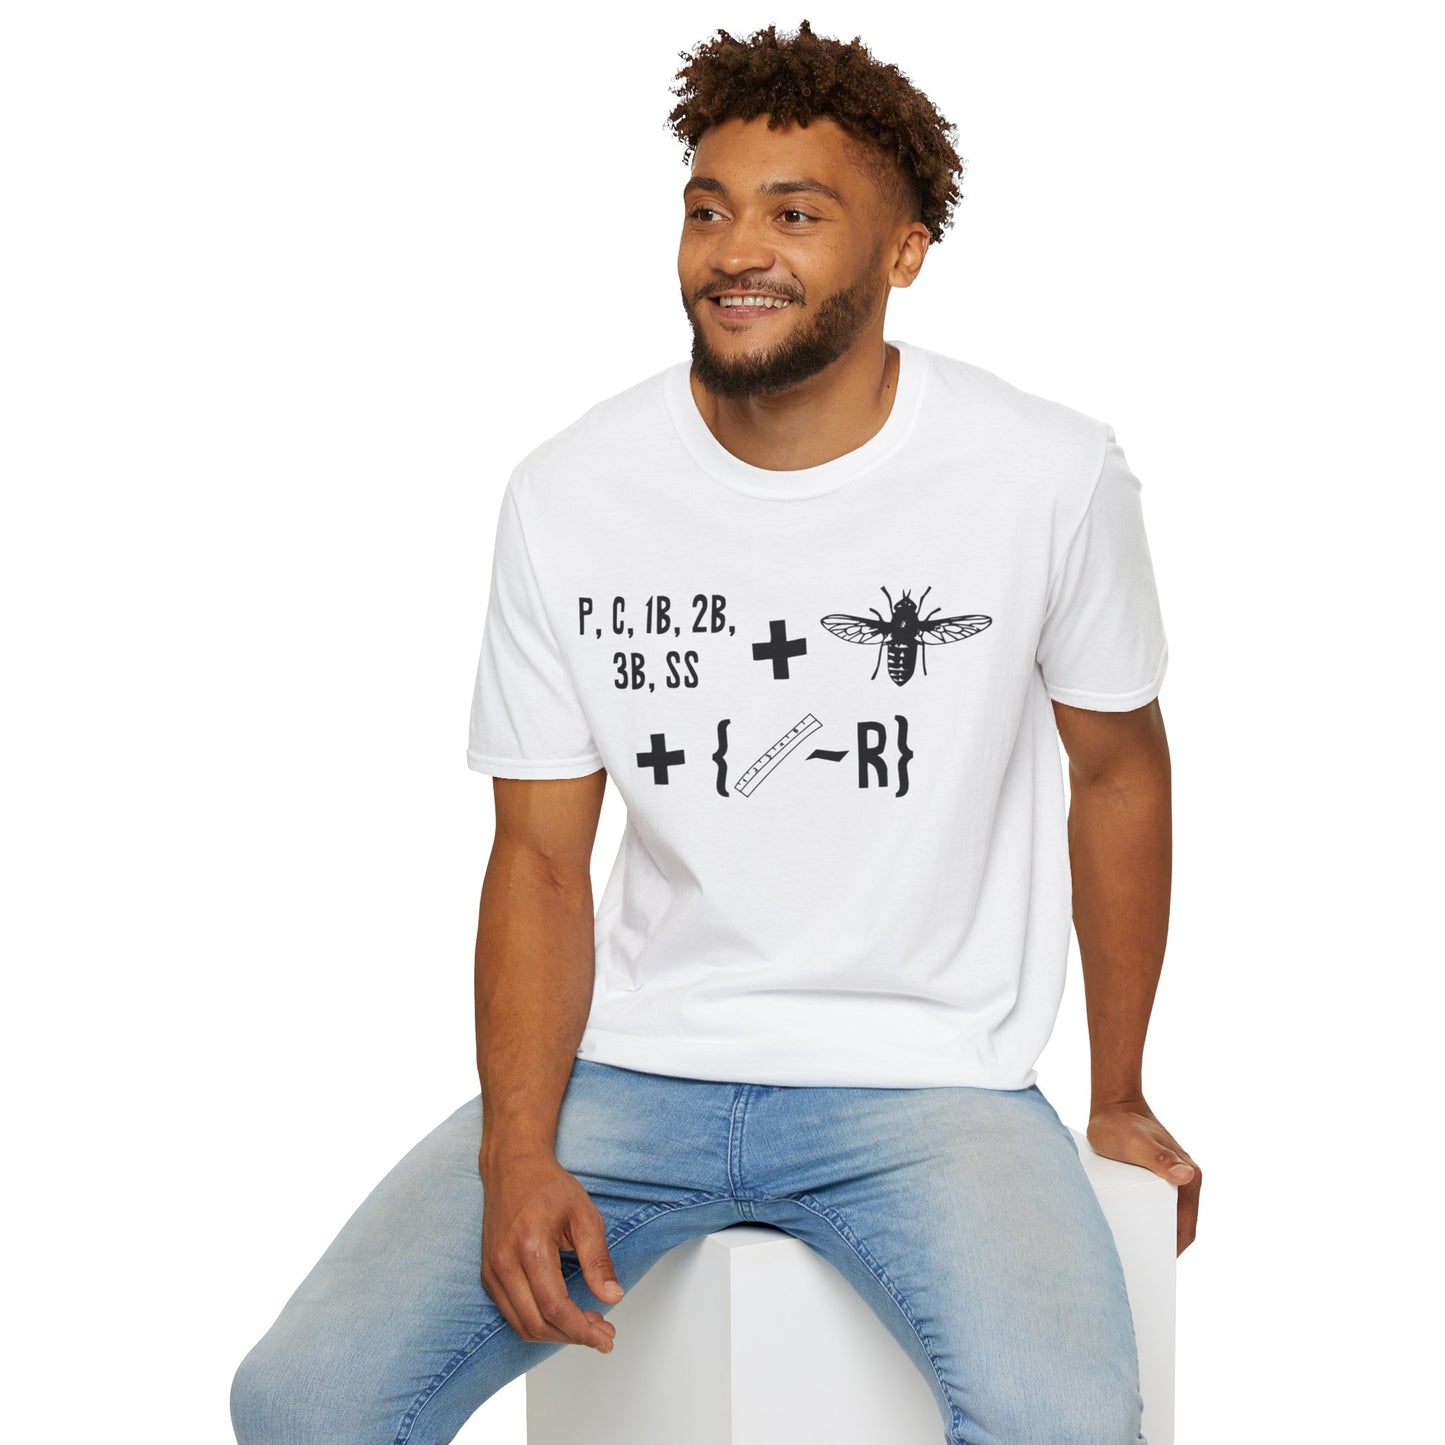 Infield Fly Rule - Unisex Softstyle T-Shirt